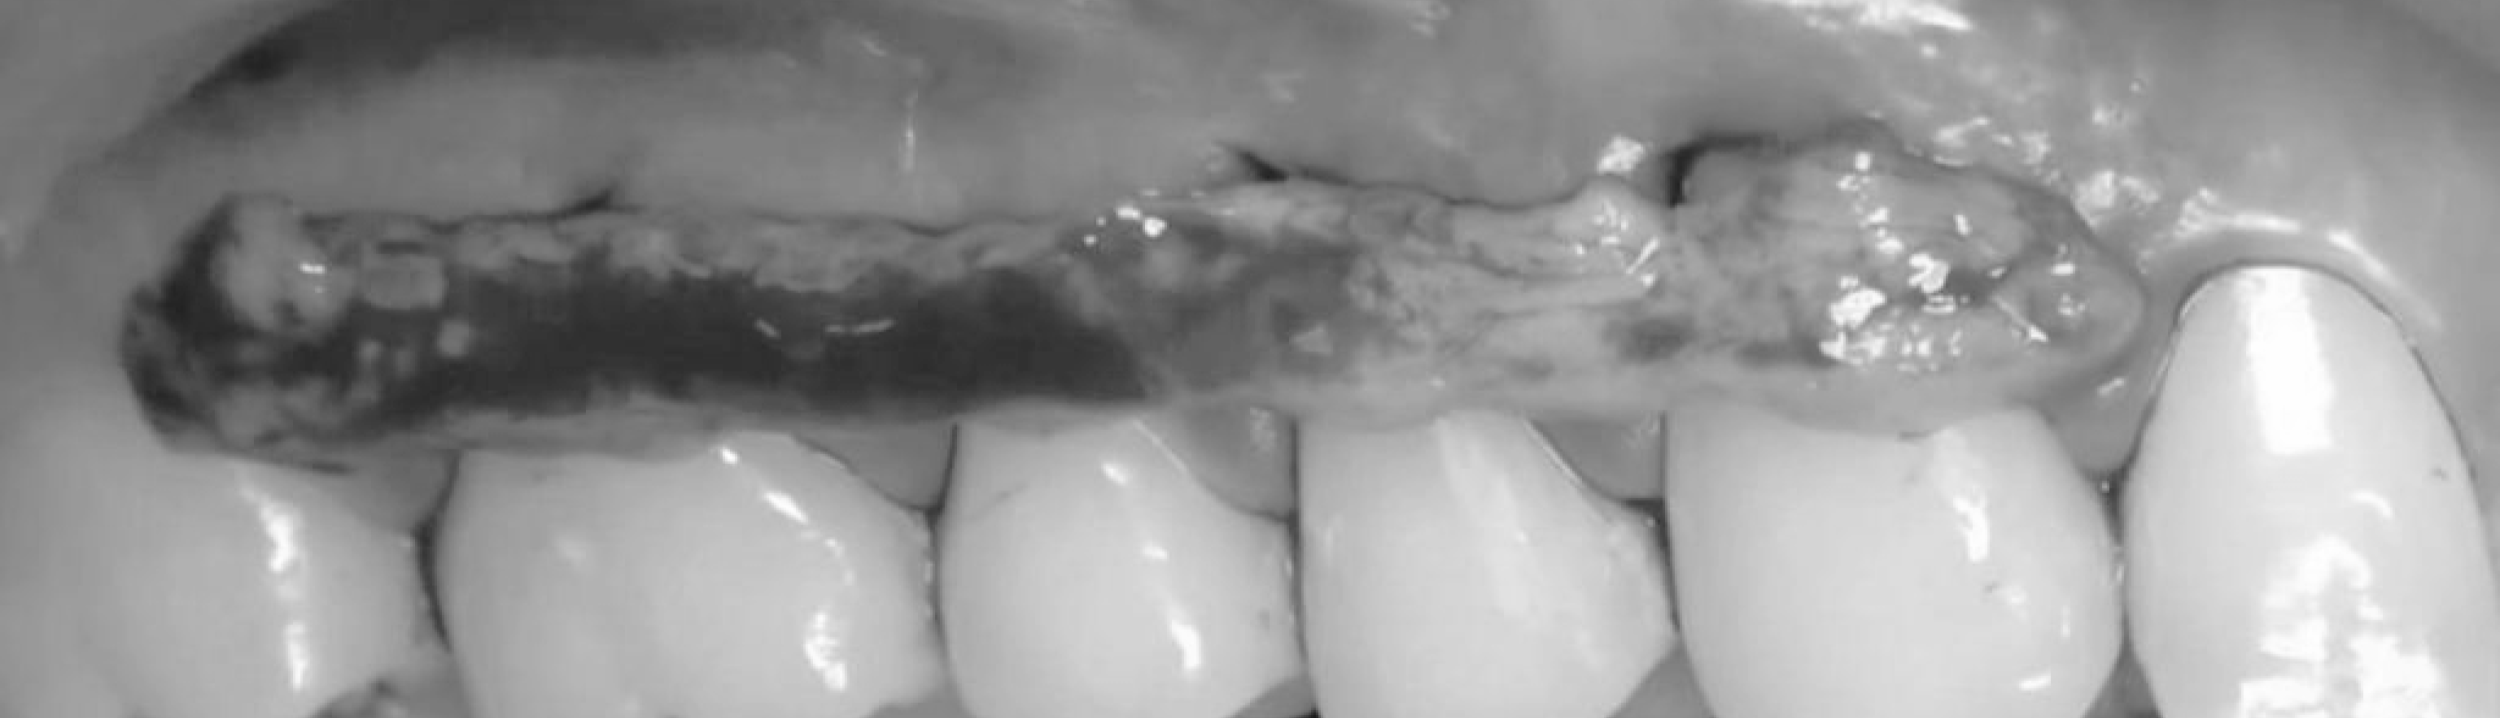 Tunneling & Mucogingival Therapy for Soft Tissue Management & Esthetics in 6 Videos | Carranza, Kahn, Jovanovic, Mintrone